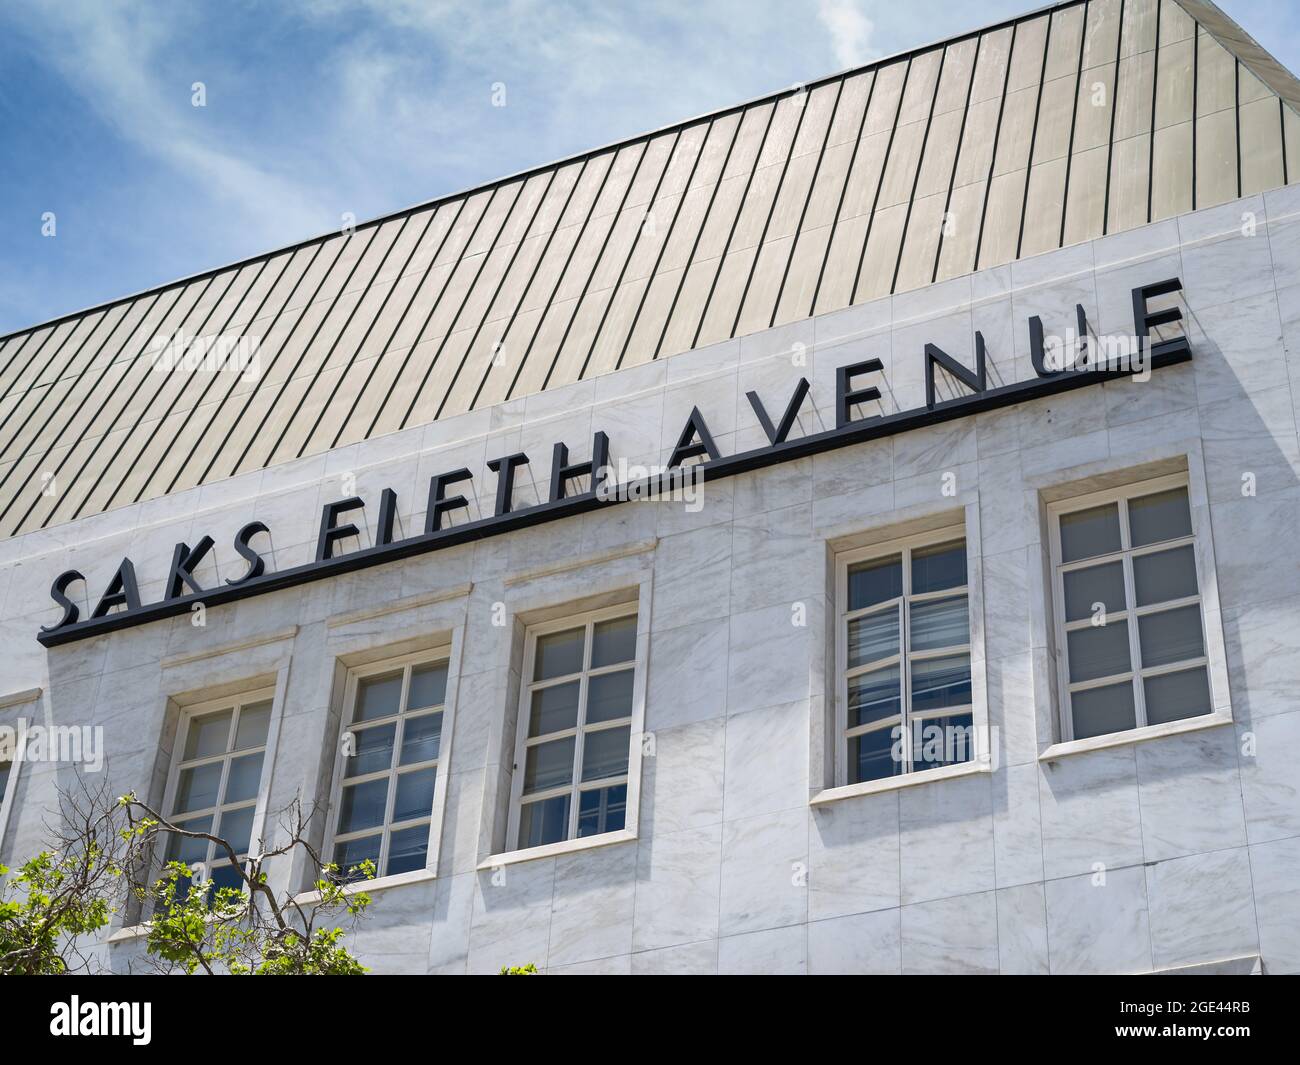 Beverly Hills, CA / USA - May 4, 2018: Iconic Saks Fifth Avenue store name high on white marble exterior invites shoppers to the New York-based retail Stock Photo